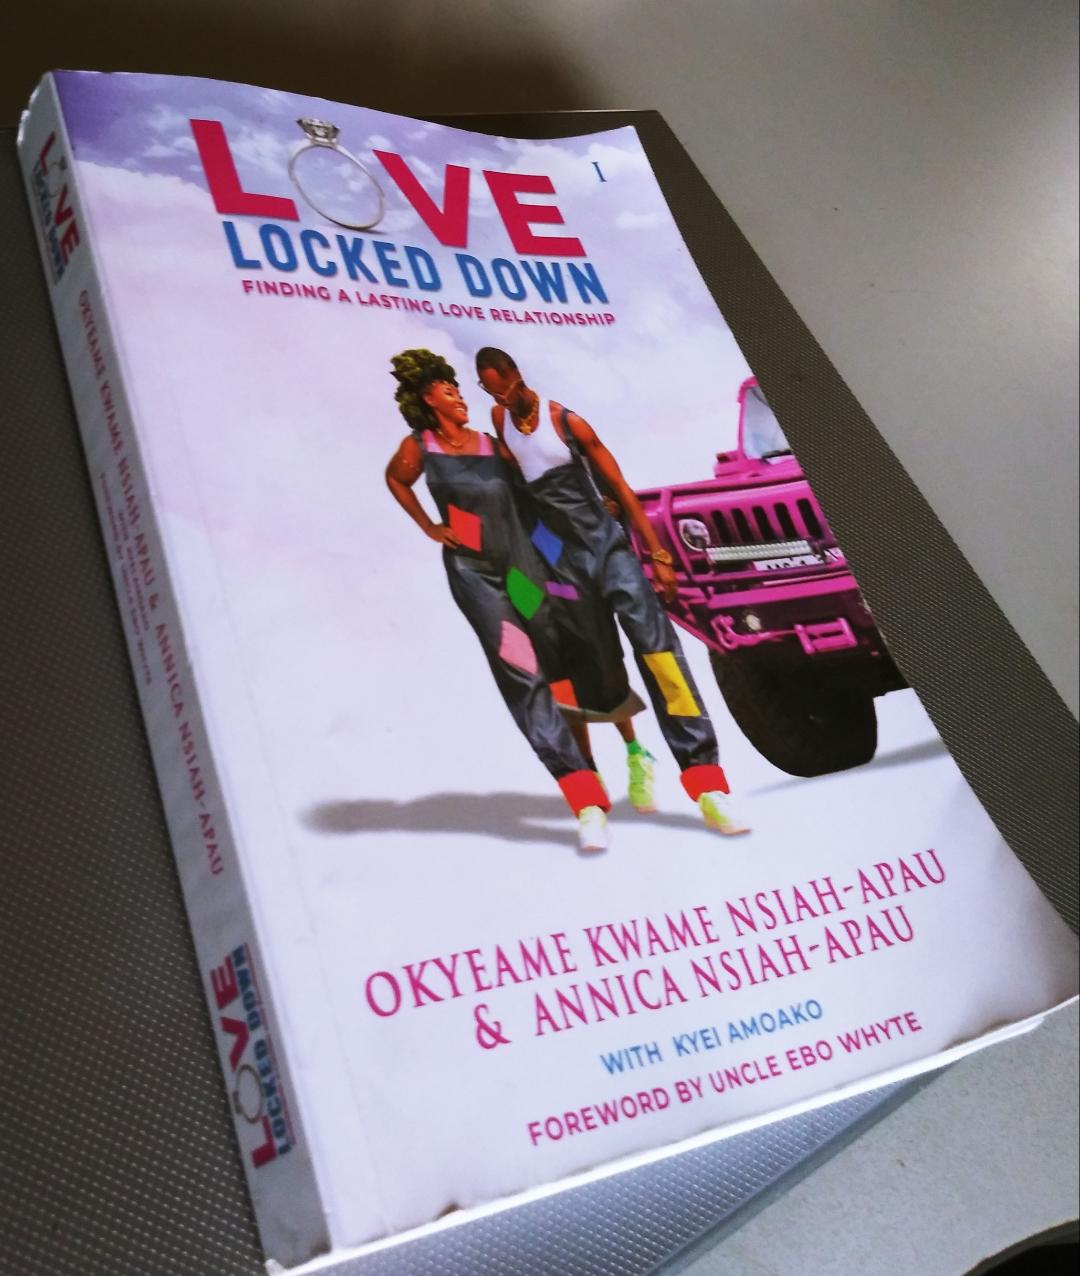 Book Review: Love Locked Down by Okyeame Kwame and Anica Nsiah-Apau